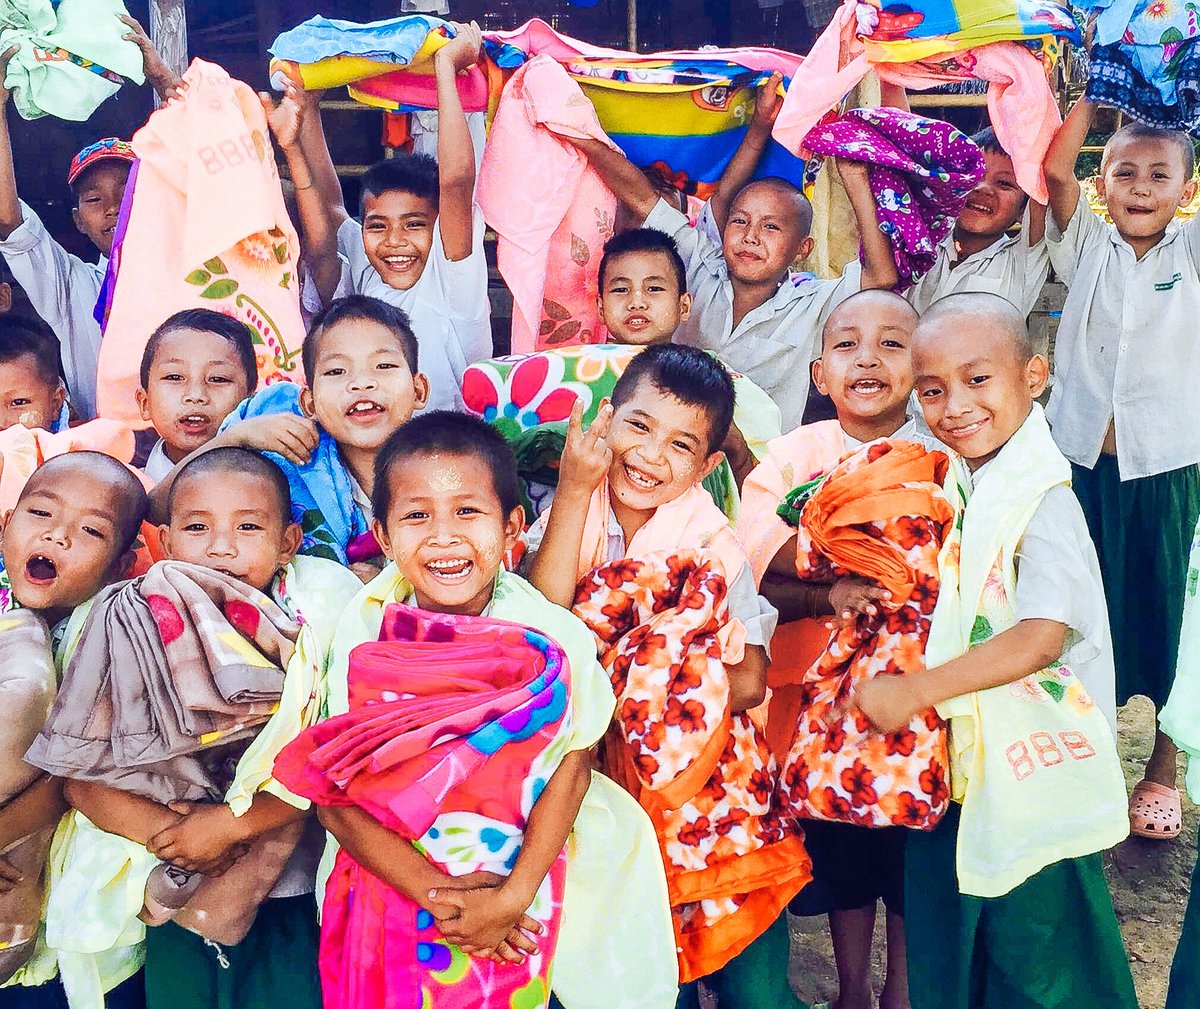 February 13th is Children’s Day in Myanmar! Did you know that puppets, or marionettes, were the main sources of traditional theatrical entertainment during the time of the Myanmar kings? #myanmar #childrensday #holidaysaroundtheworld #homeeducation #multiculturalkids